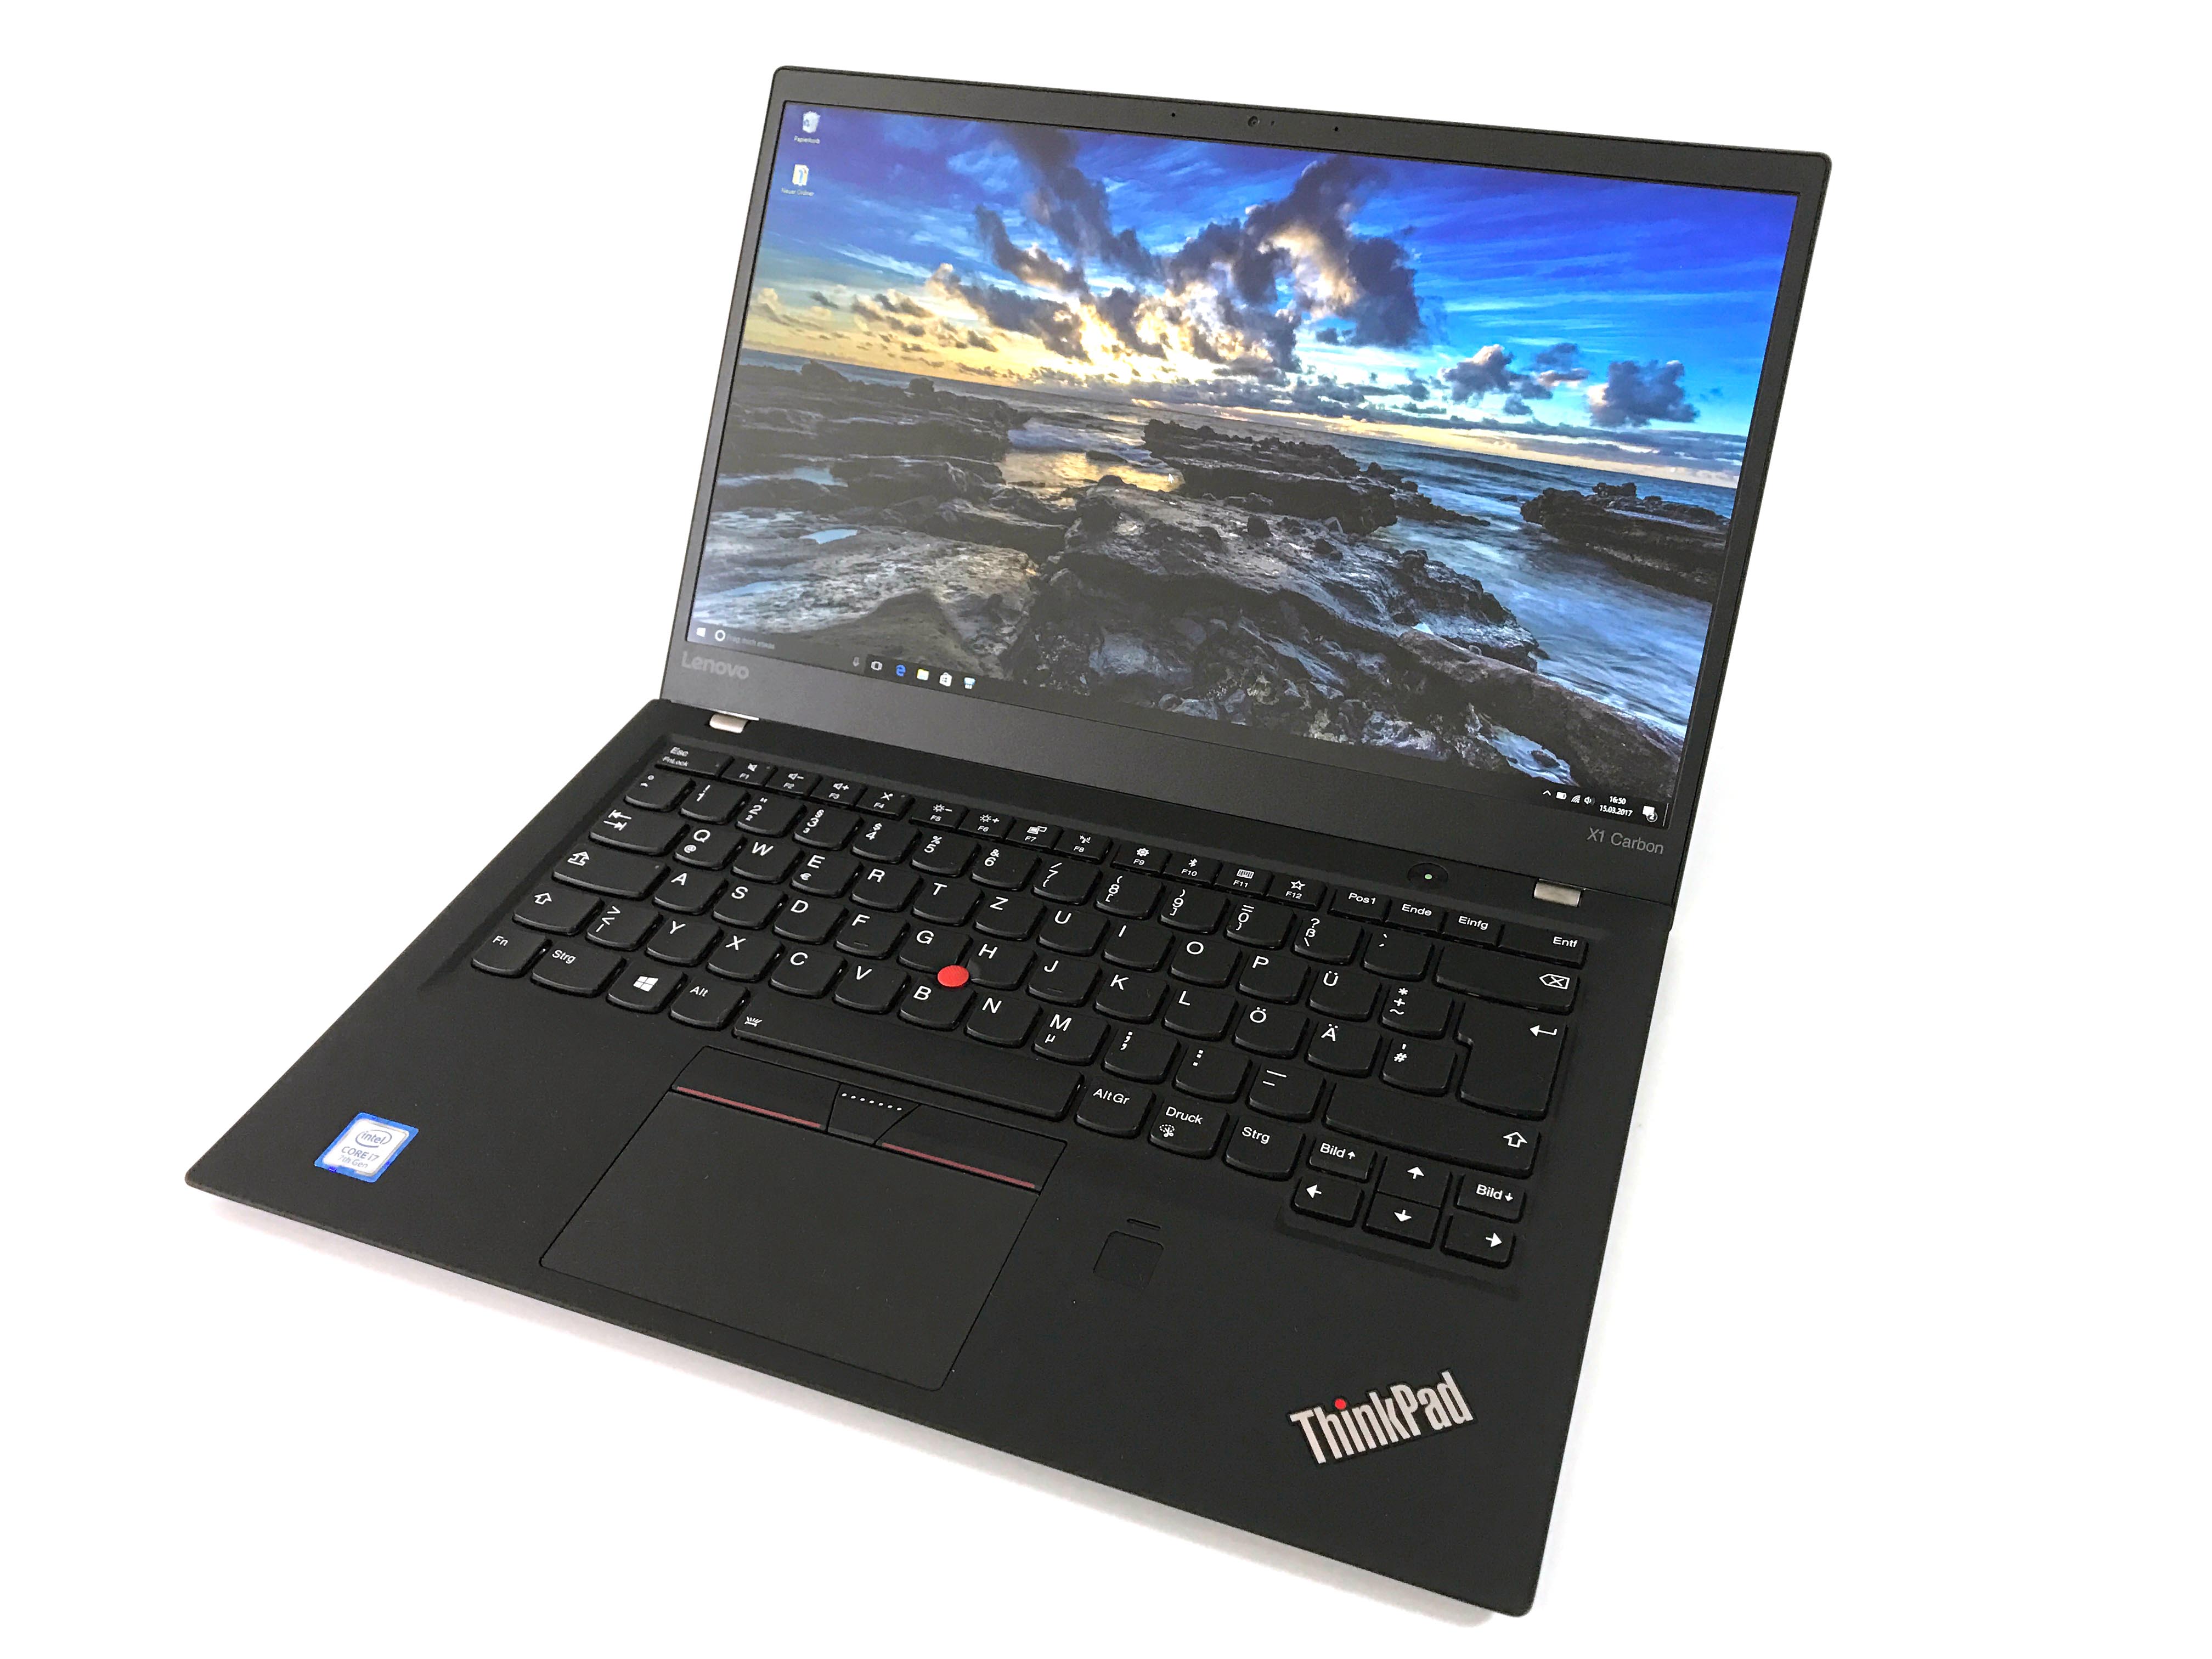 PC/タブレット ノートPC Lenovo ThinkPad X1 Carbon 2017 (Core i7, Full-HD) Laptop Review 